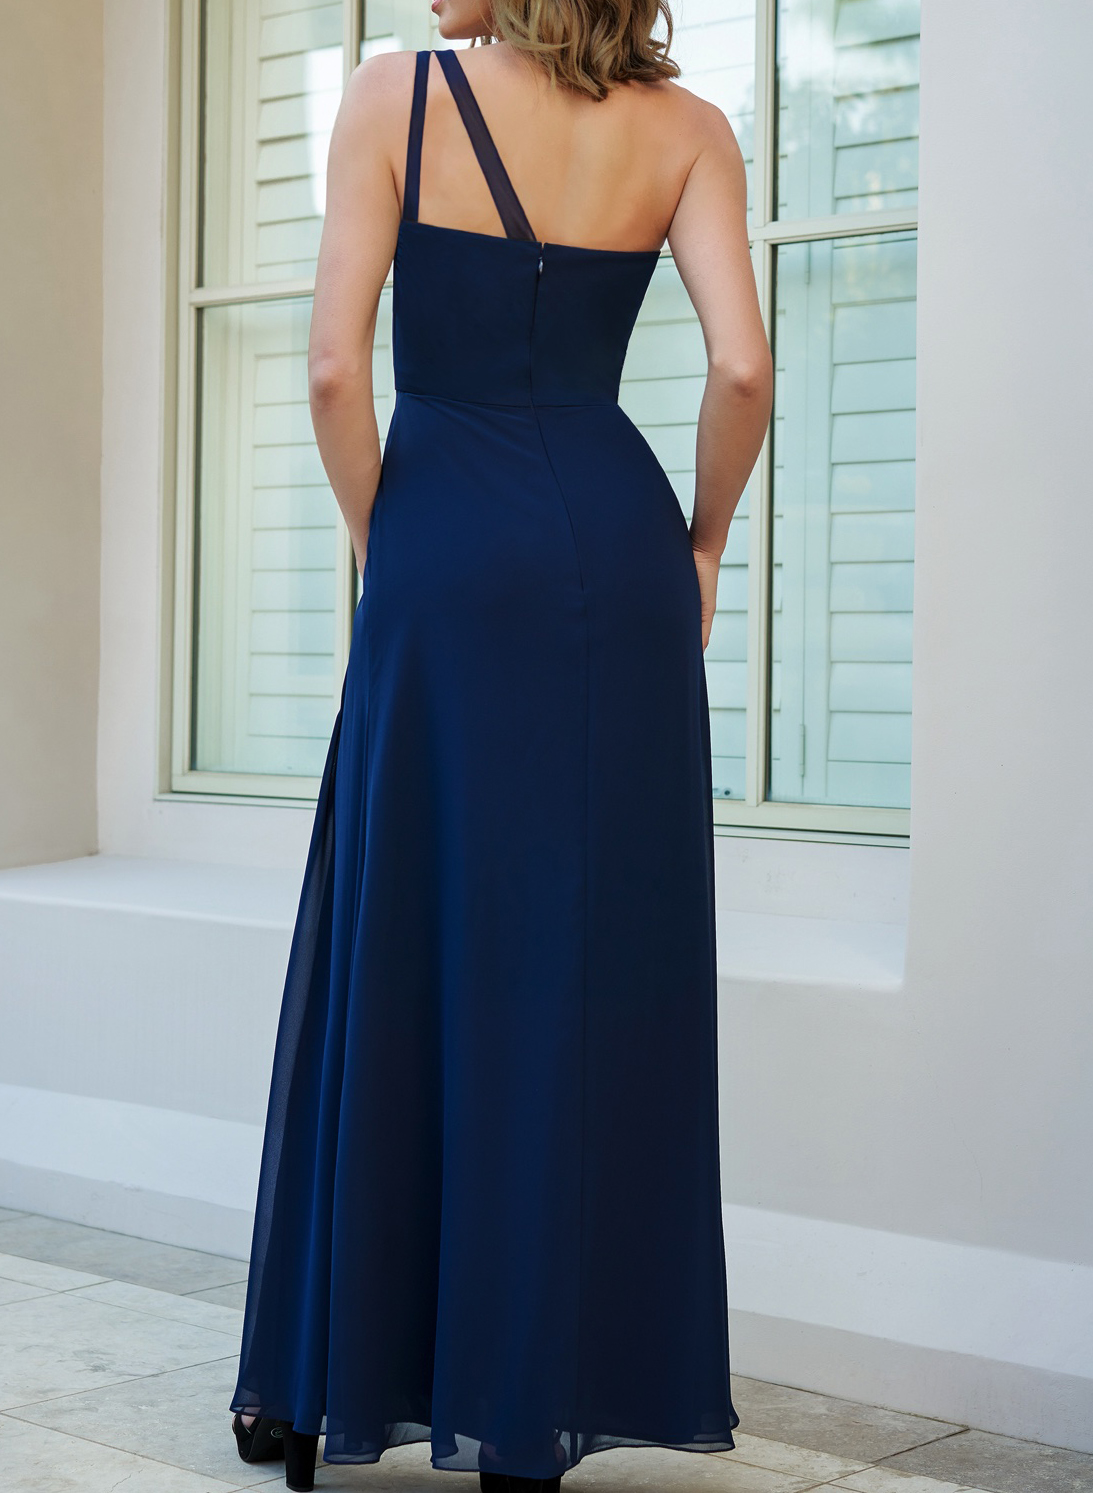 One-Shoulder A-Line Bridesmaid Dresses With Ruffle